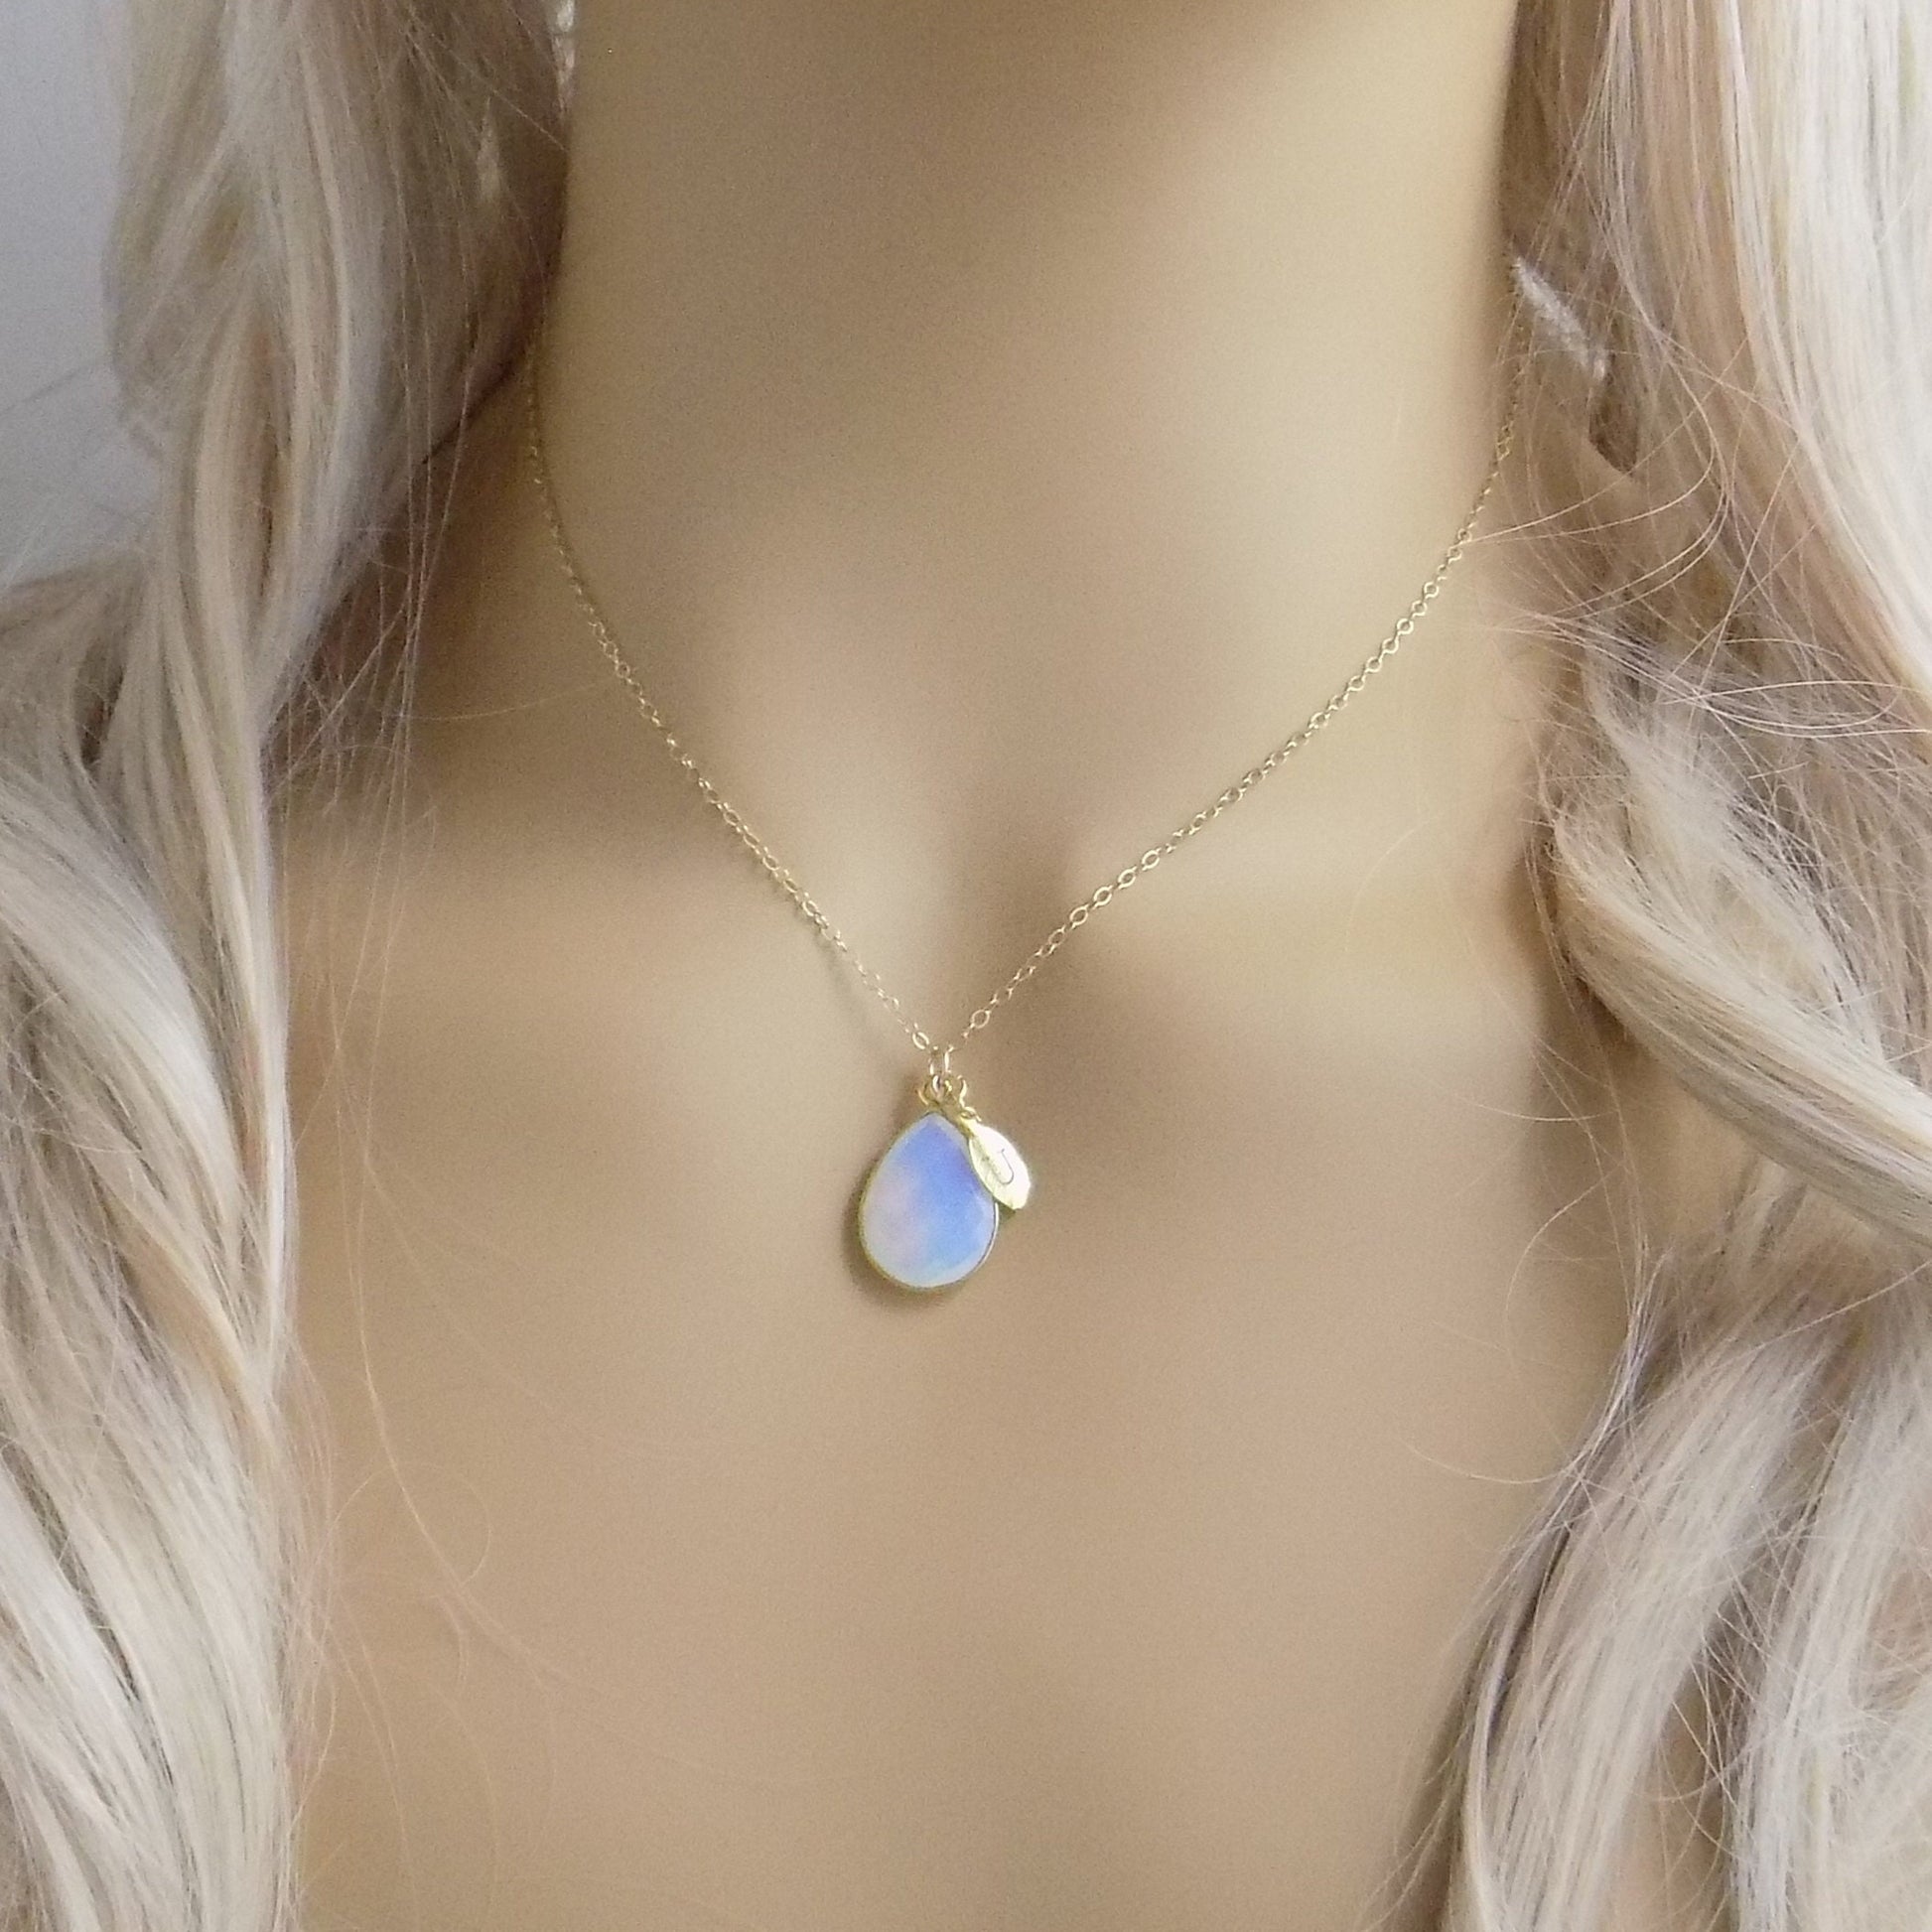 October Birthstone, Opalite Necklace Gold, Personalized Opal With Initial Charm, Teardrop Stone Faceted, Birthday Gift Women, M3-68